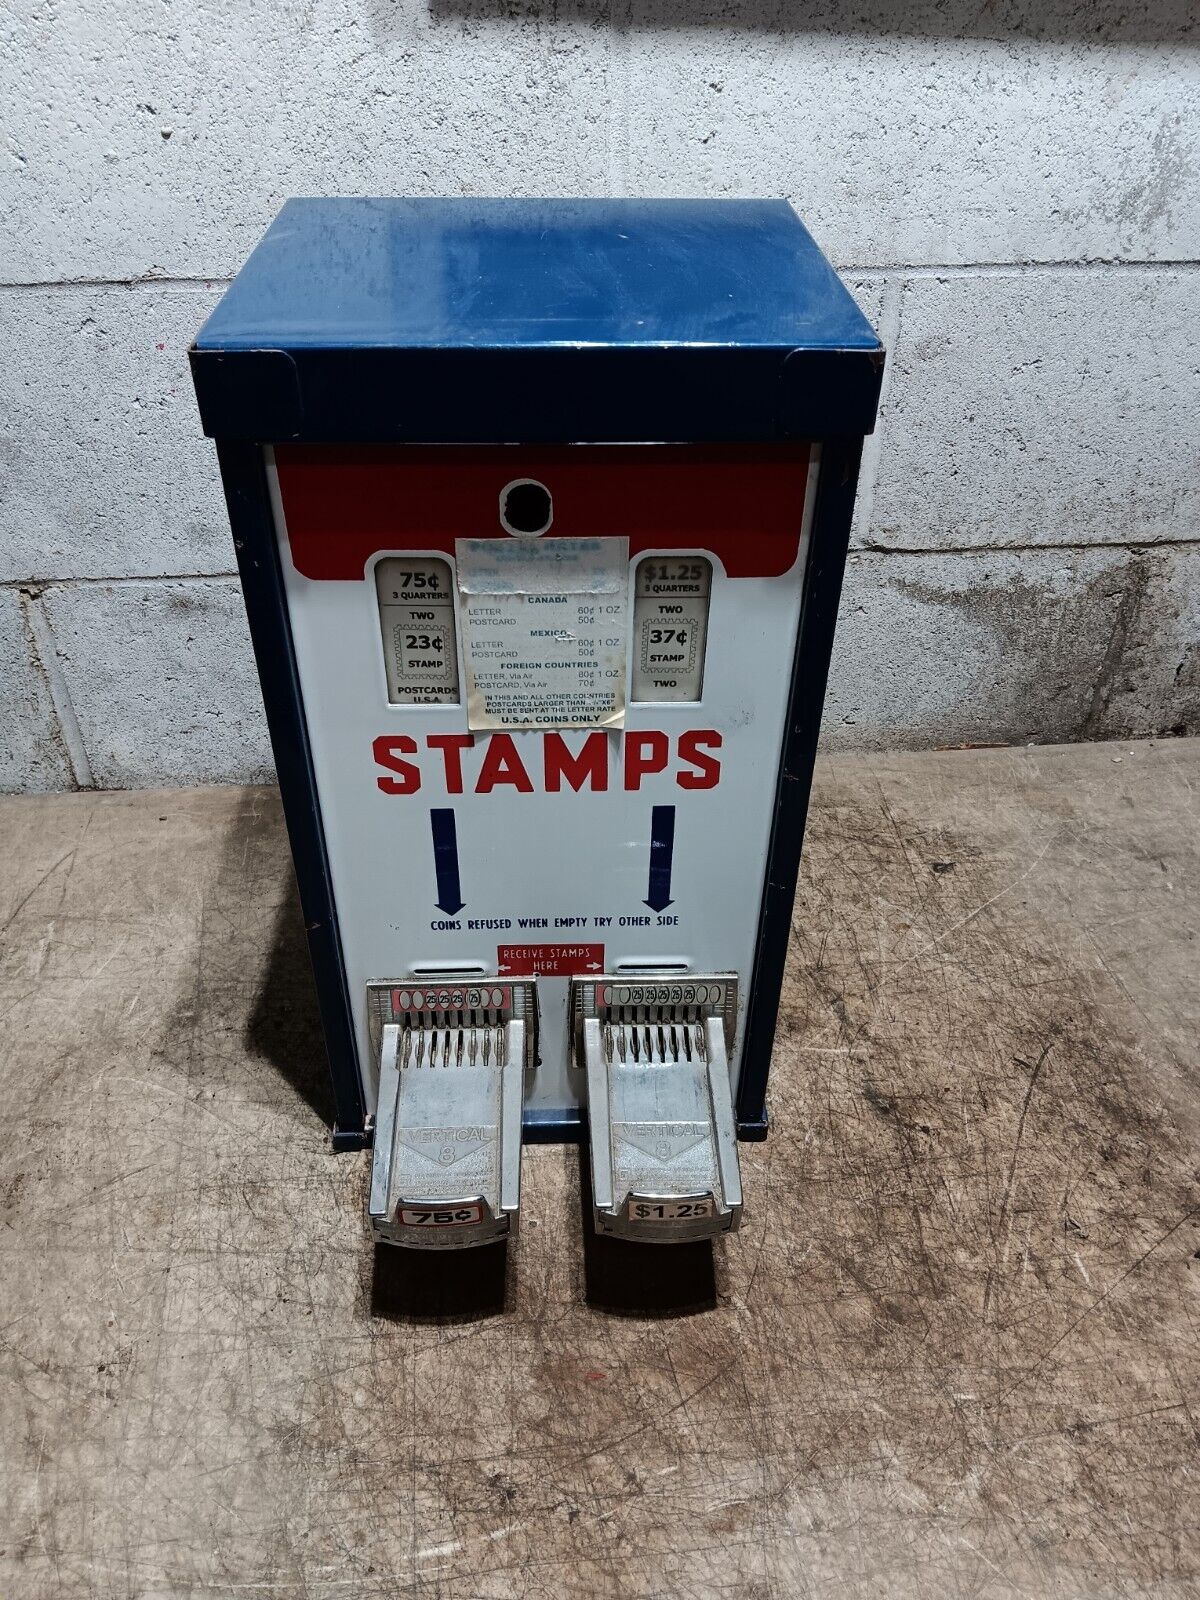 Vintage US Postage Stamp Machine With Dual Coin Slots Wall Mount